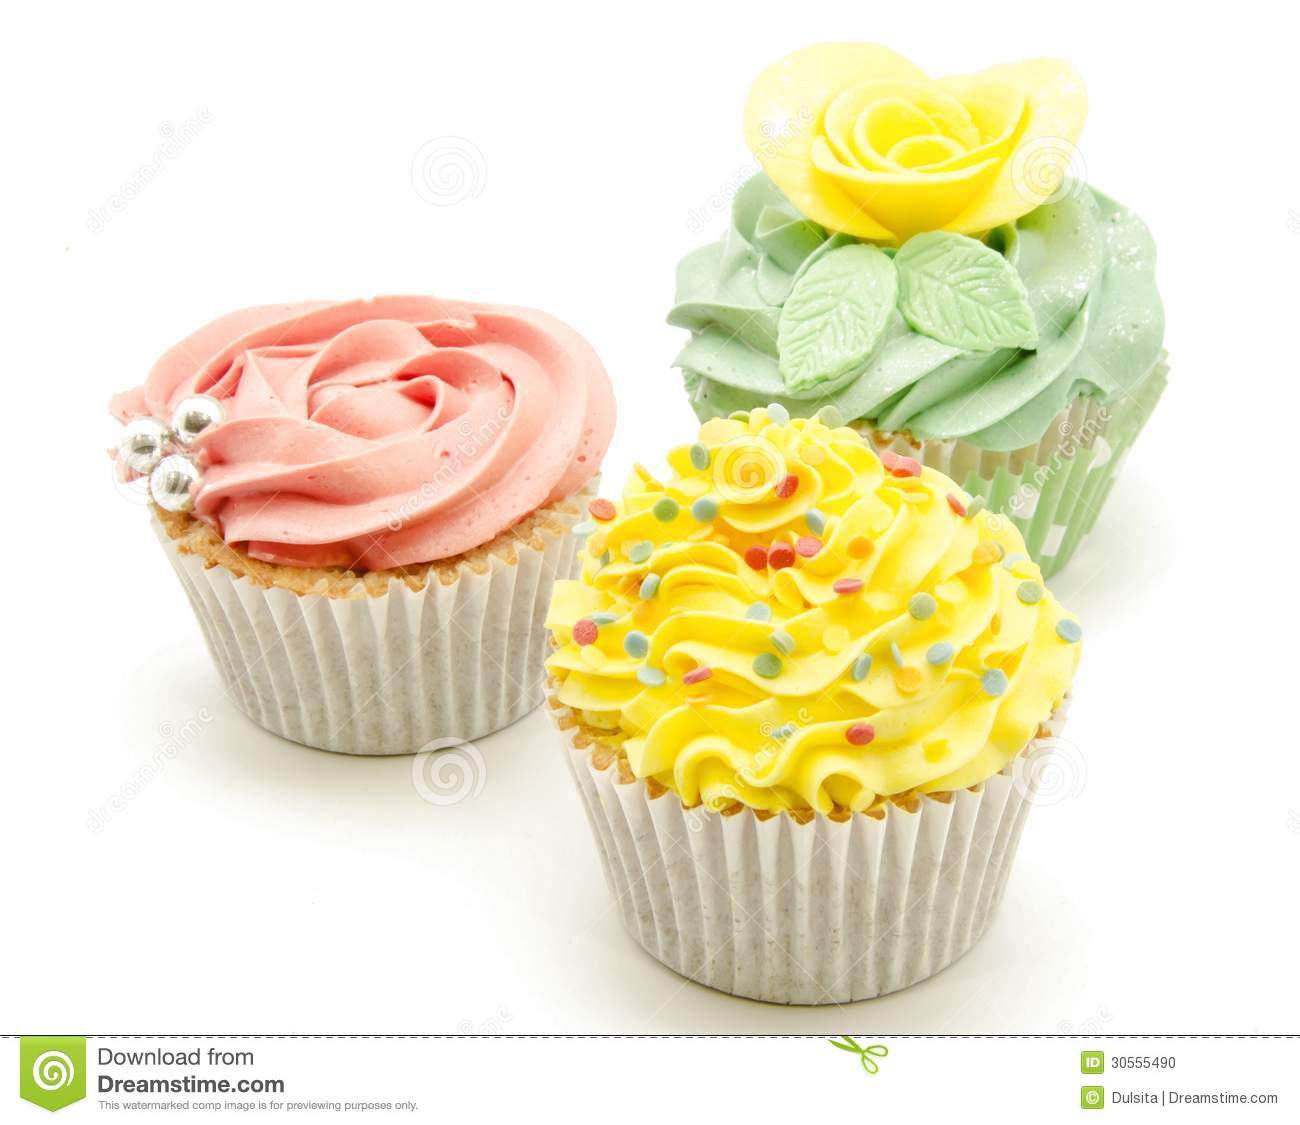 Cupcakes Decorated with Flowers